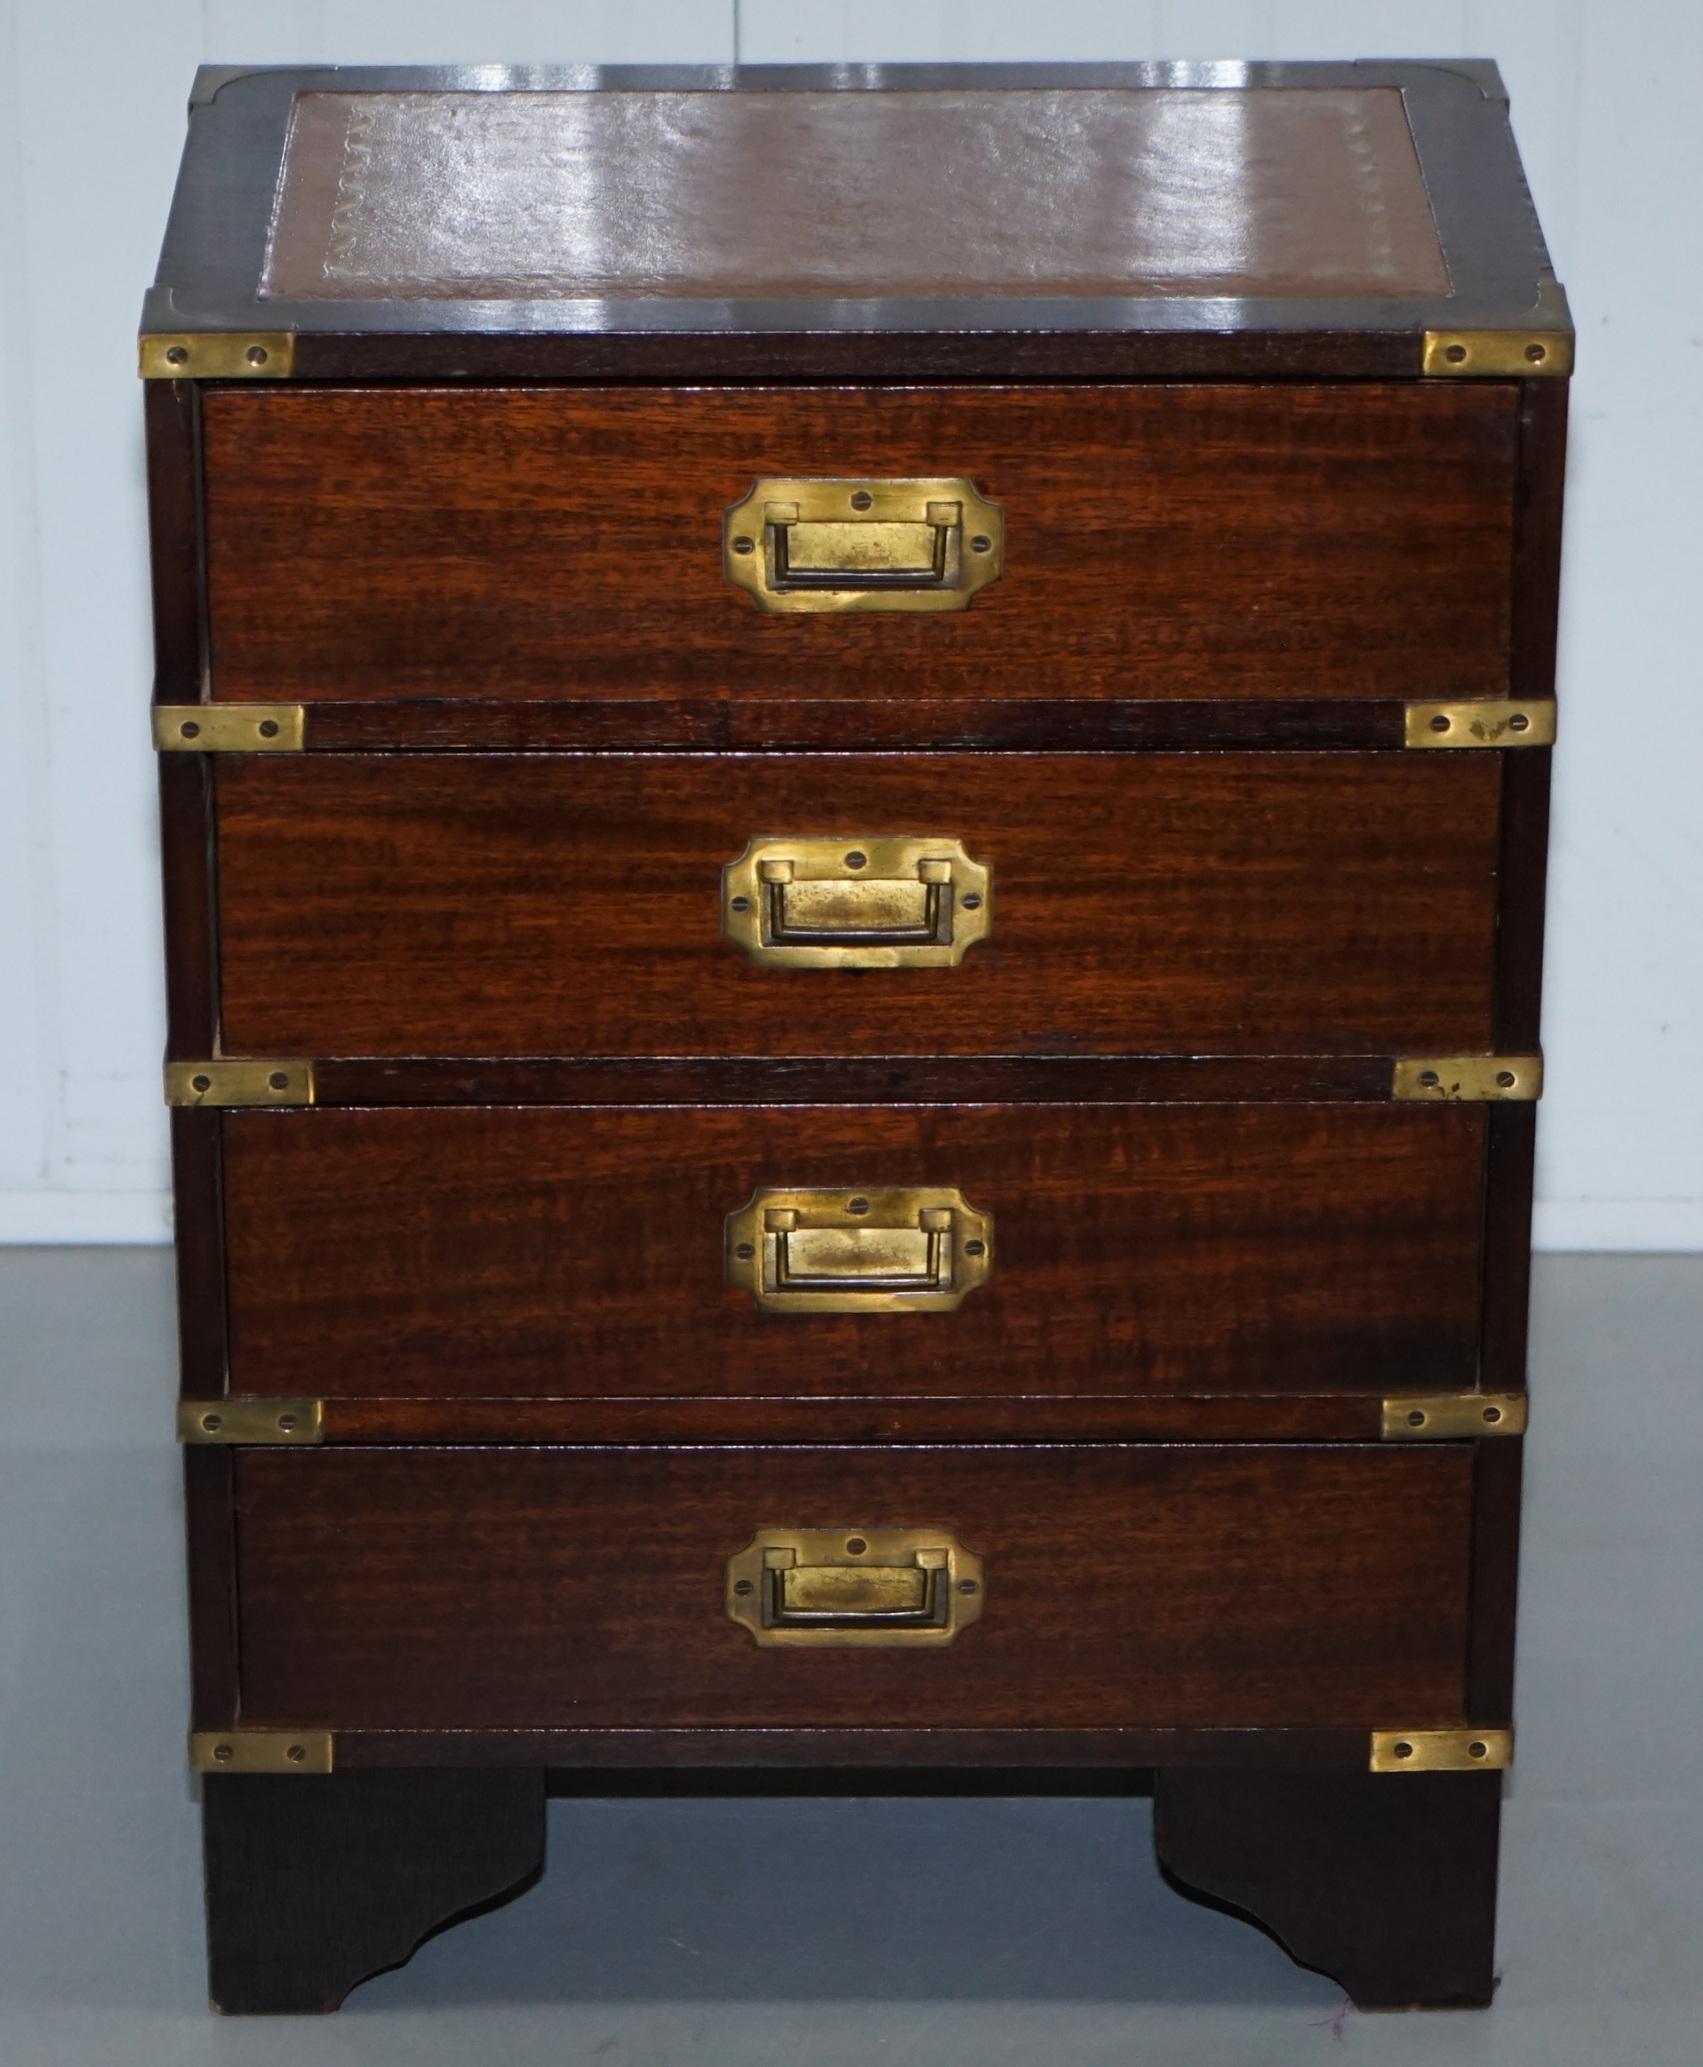 We are delighted to offer for auction this very nice side table sized solid mahogany chest of drawers with brass mounts and a brown leather top in the military campaign style

A very decorative and usable chest of drawers, they suite any style and